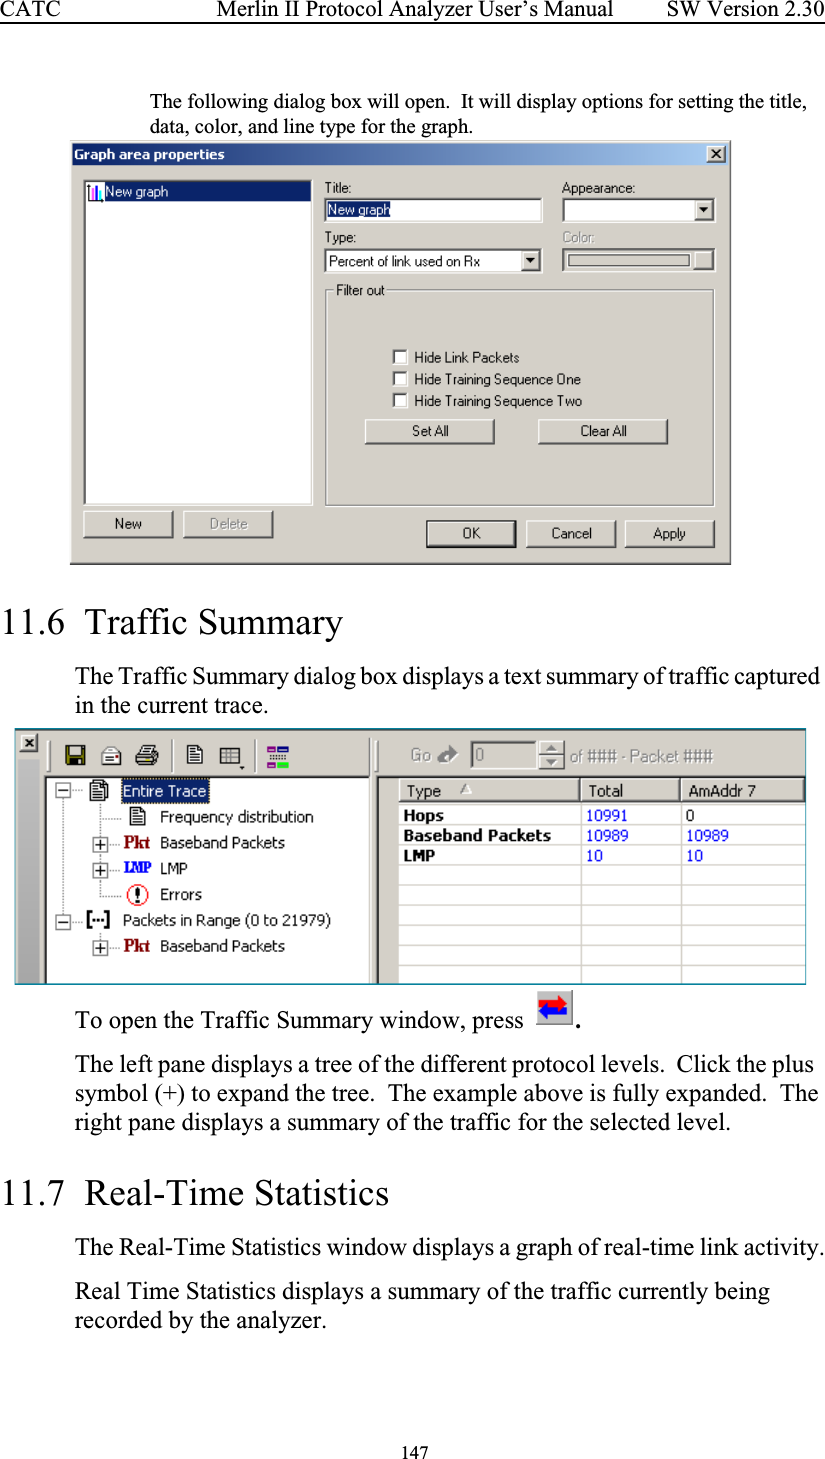  147 Merlin II Protocol Analyzer User’s ManualCATC SW Version 2.30The following dialog box will open.  It will display options for setting the title, data, color, and line type for the graph. 11.6  Traffic Summary The Traffic Summary dialog box displays a text summary of traffic captured in the current trace.To open the Traffic Summary window, press  .The left pane displays a tree of the different protocol levels.  Click the plus  symbol (+) to expand the tree.  The example above is fully expanded.  The right pane displays a summary of the traffic for the selected level.11.7  Real-Time StatisticsThe Real-Time Statistics window displays a graph of real-time link activity.Real Time Statistics displays a summary of the traffic currently being recorded by the analyzer.  